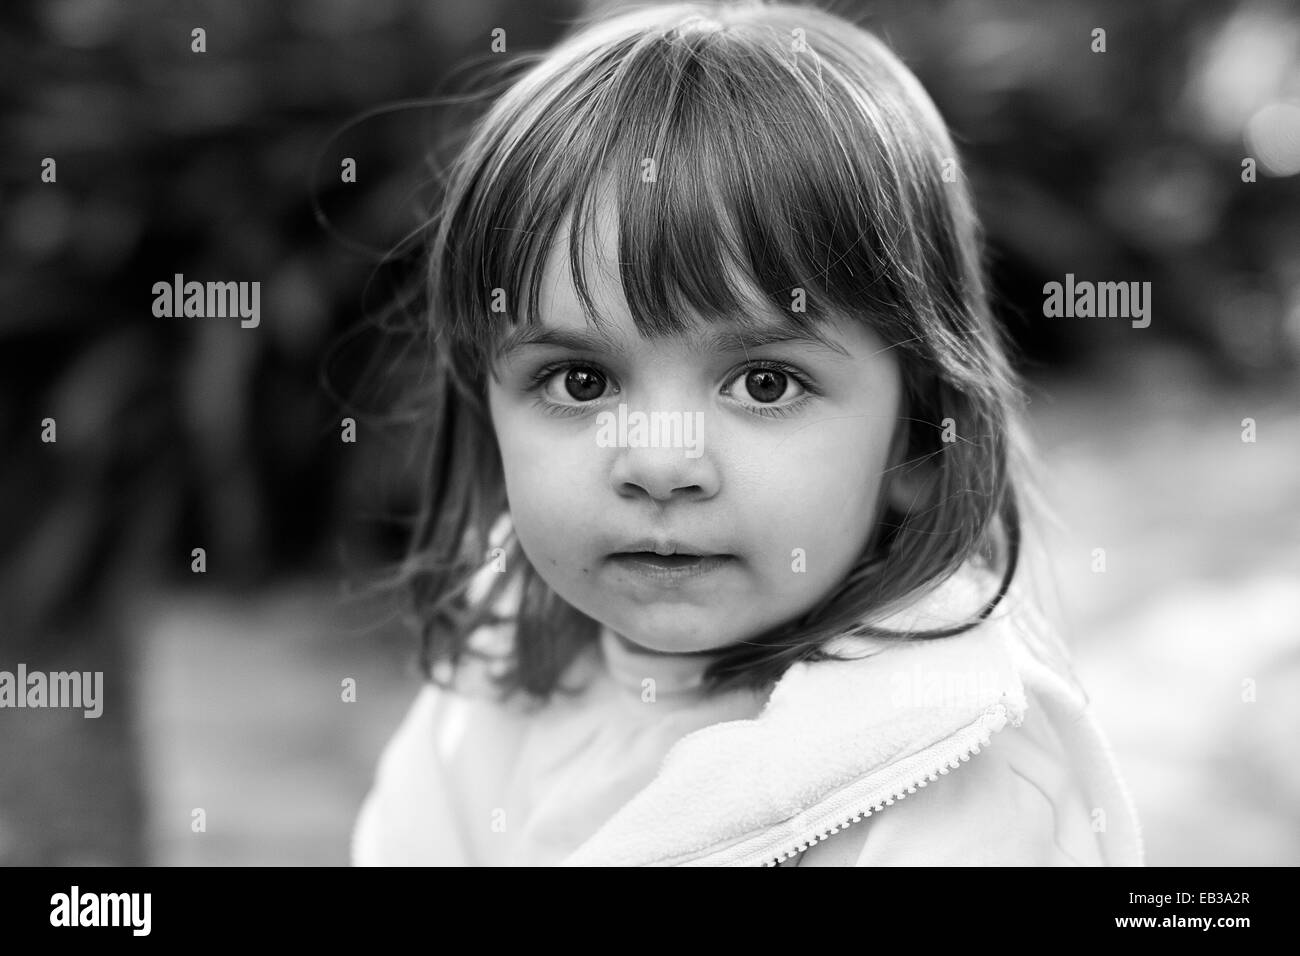 Portrait of a young girl Stock Photo